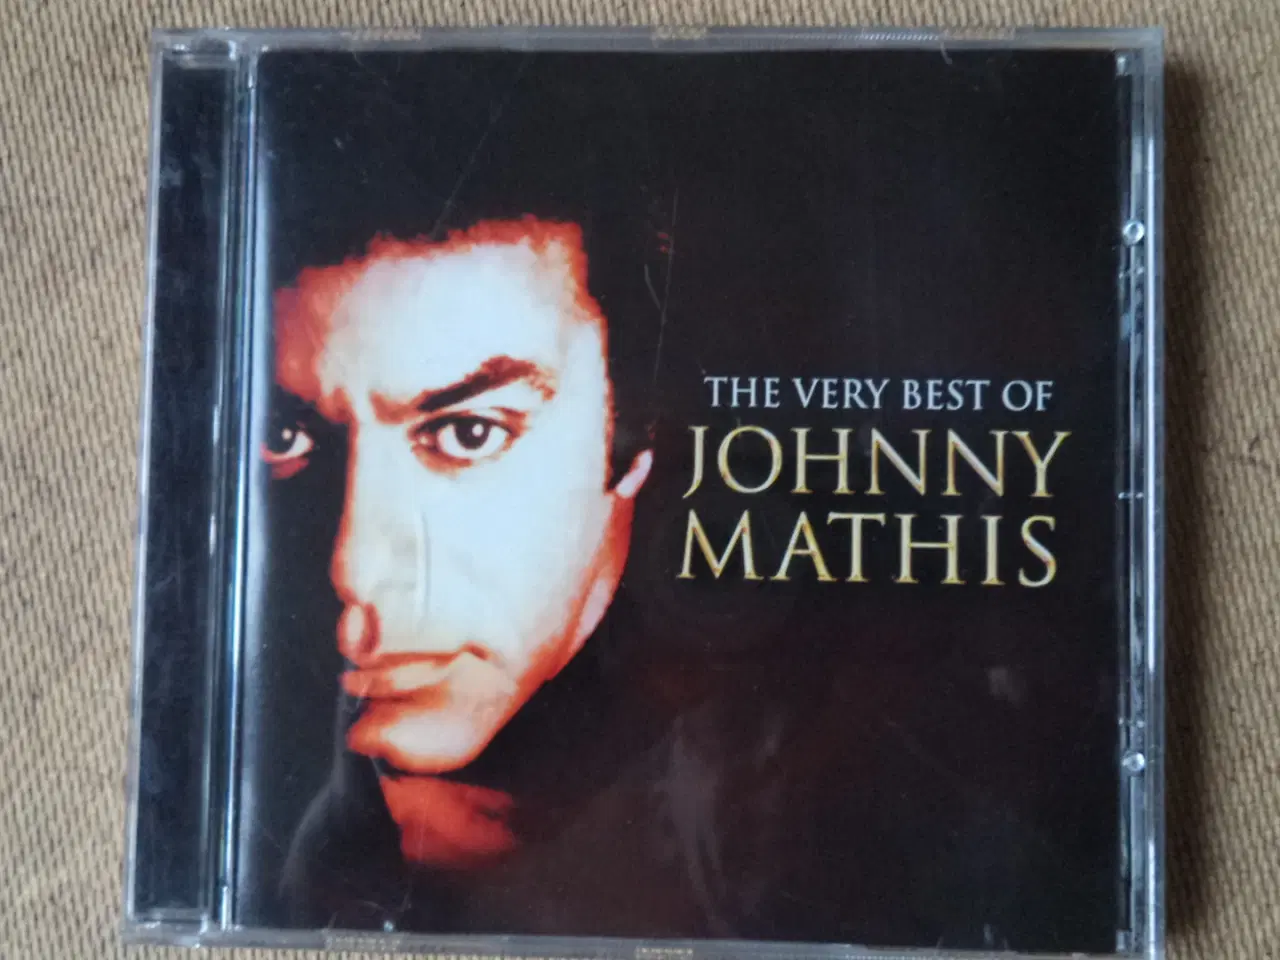 Billede 1 - Johnny Mathis ** The Very Best Of (82876 73873 2) 